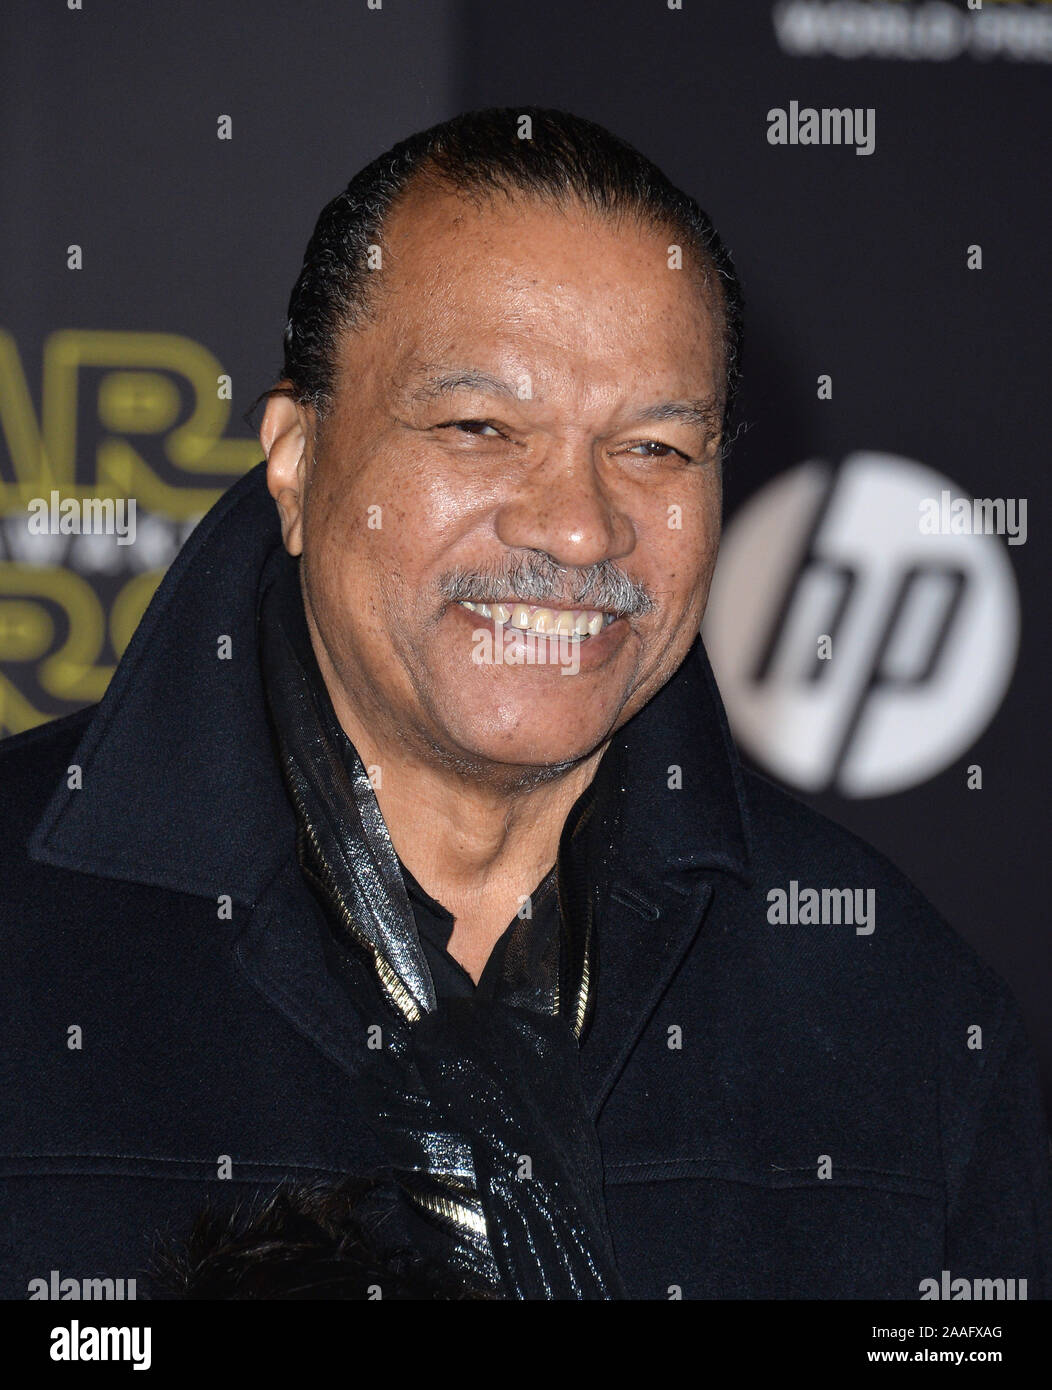 Billy Dee Williams: Through The Years – Hollywood Life